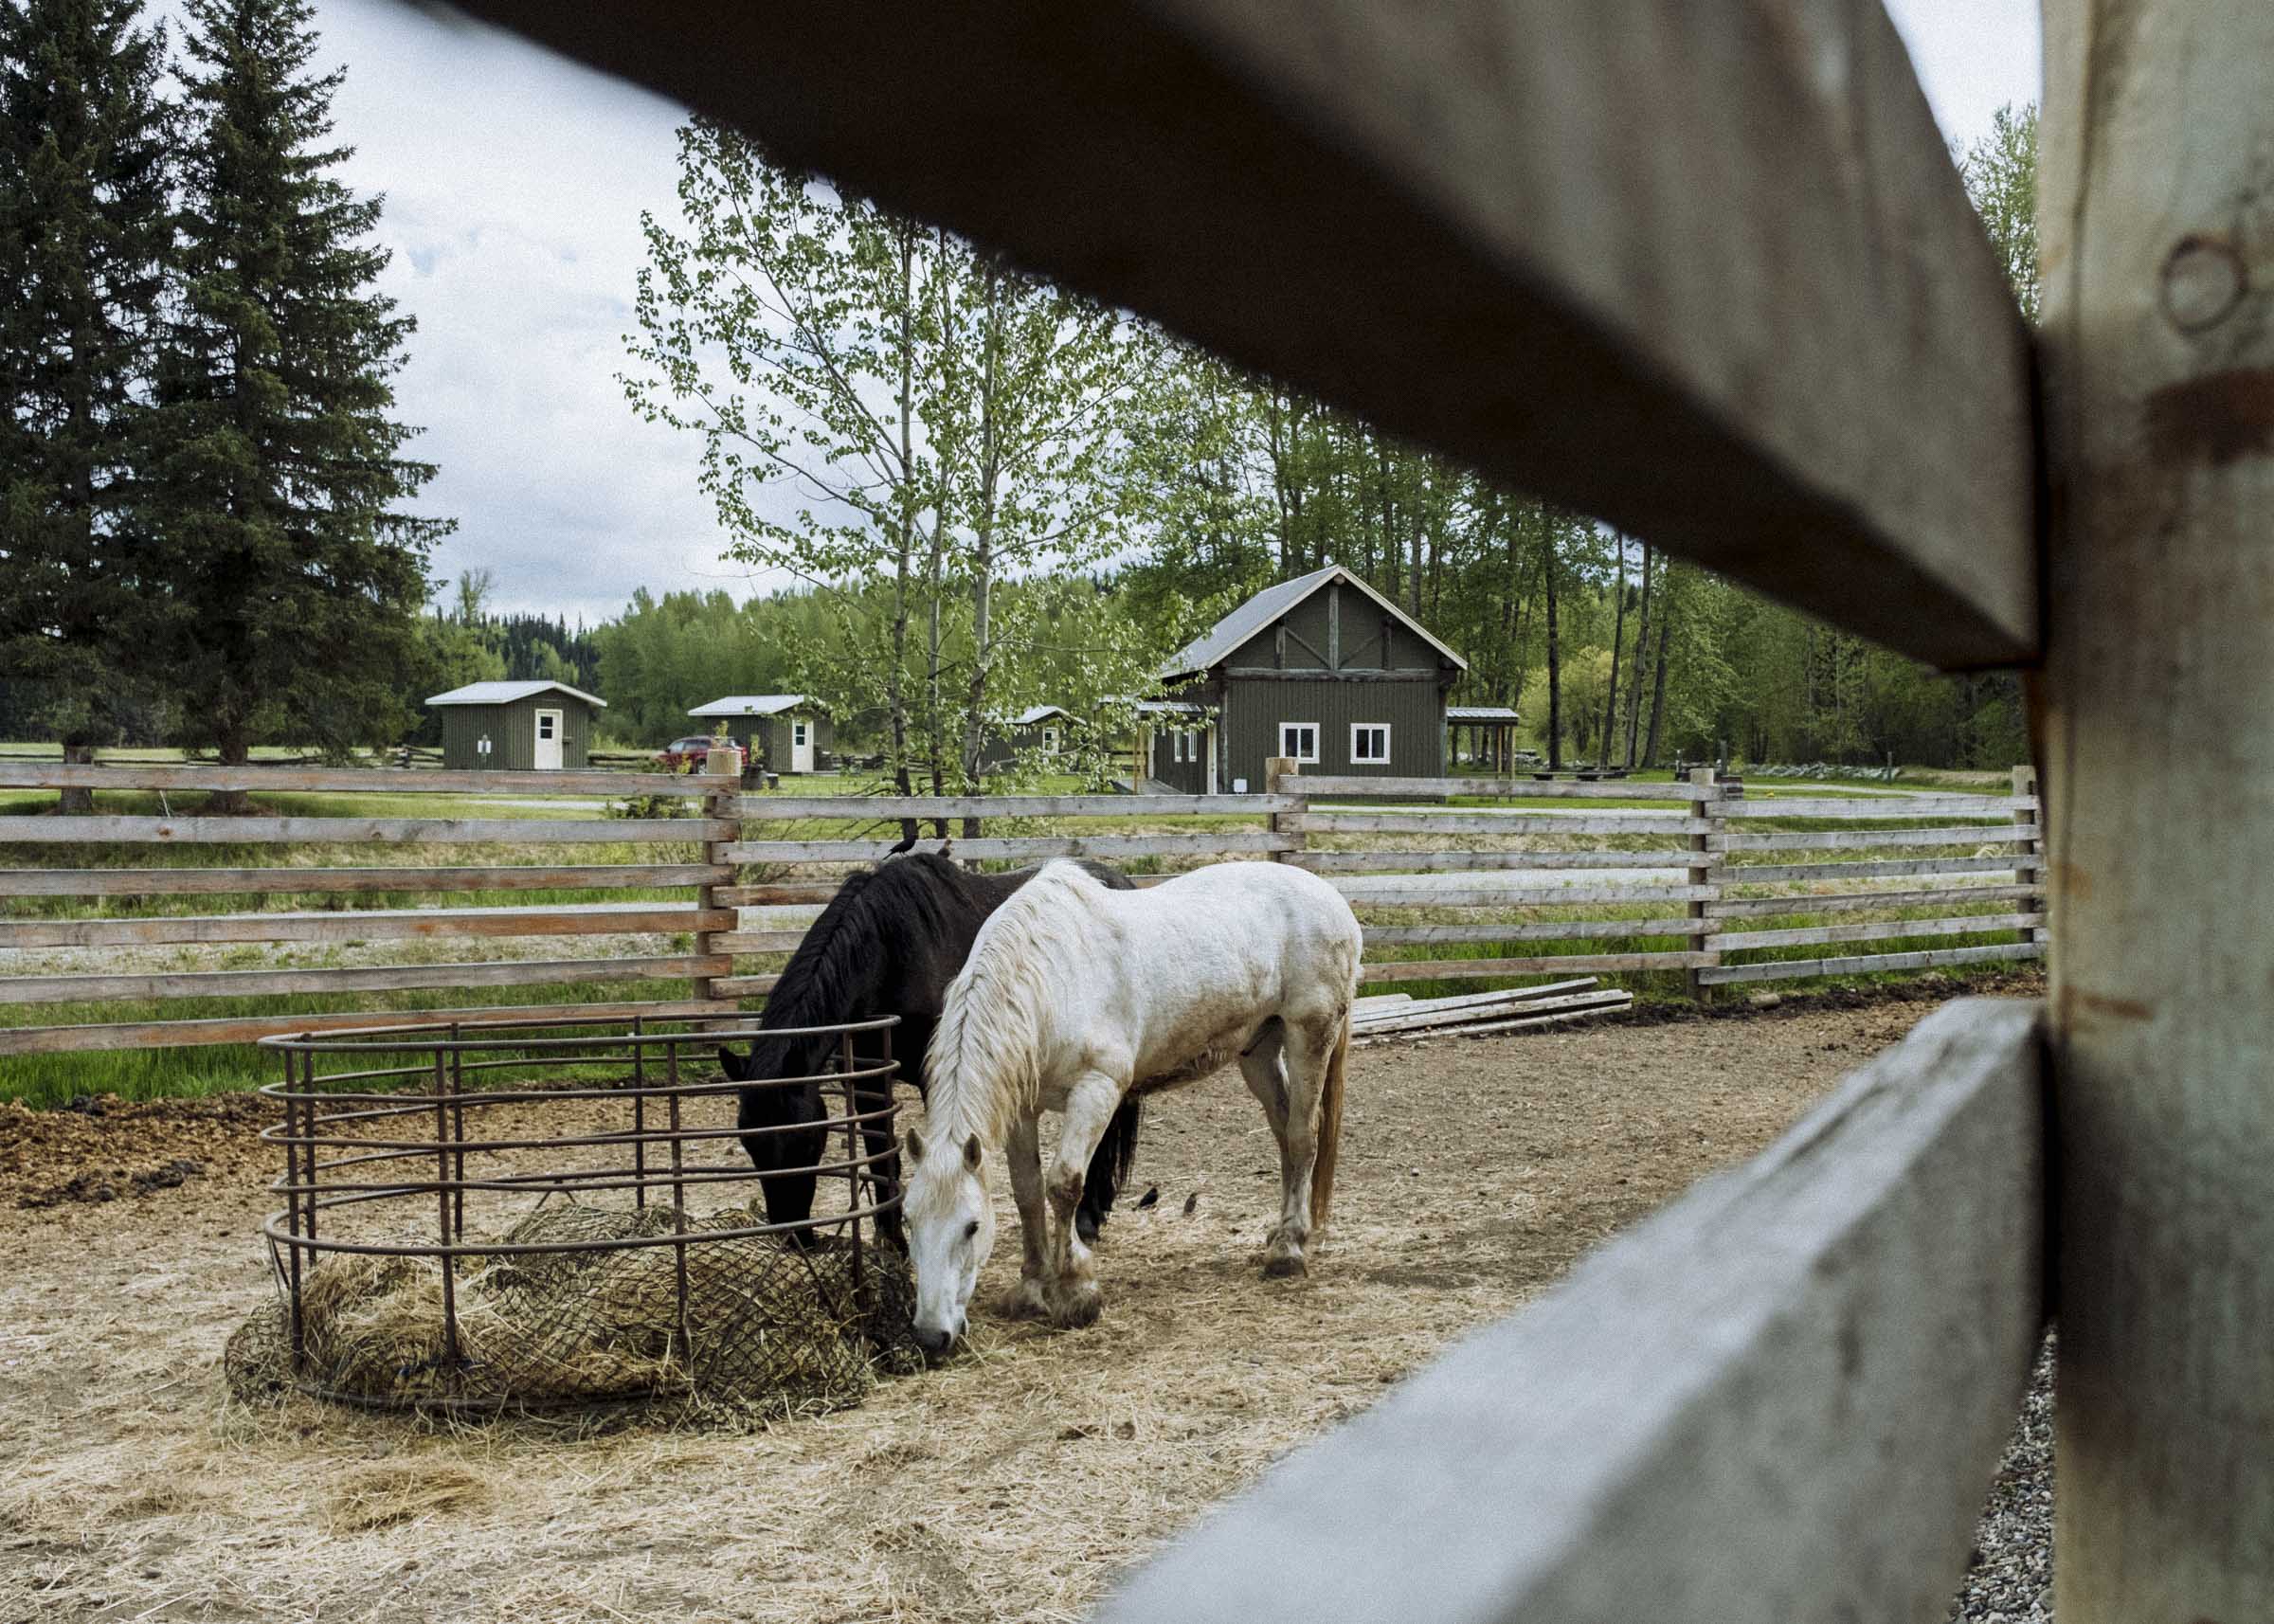 Horses at the Cottonwood House Historic Site